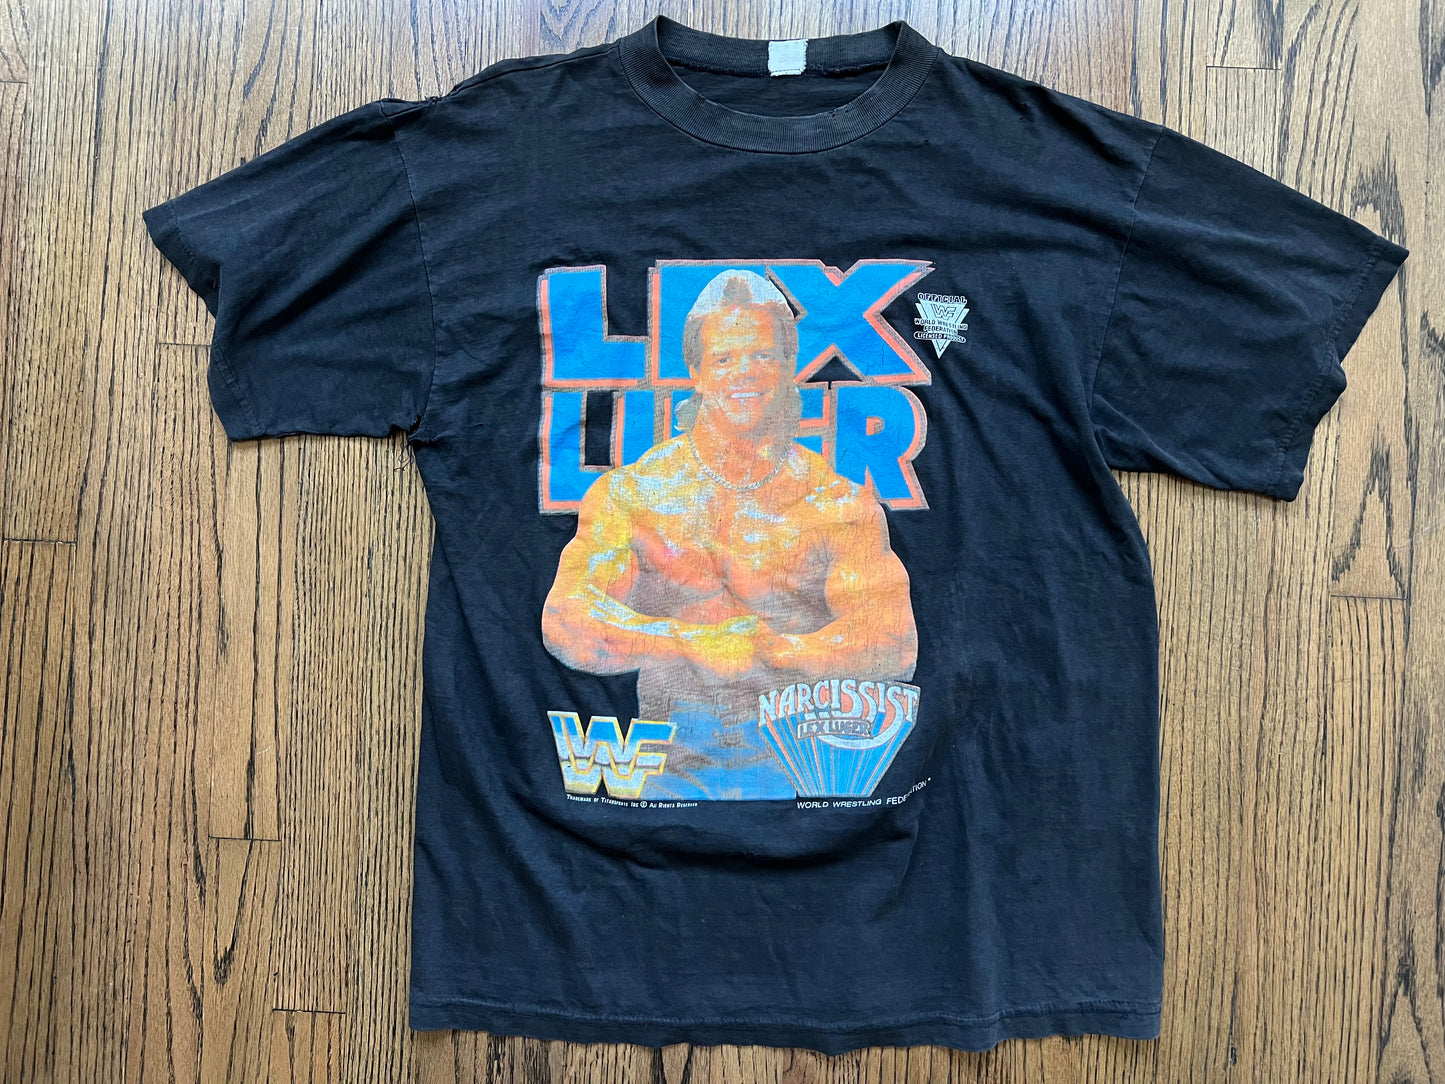 1993 WWF “The Narcissist” Lex Luger alternate variant shirt with many holes